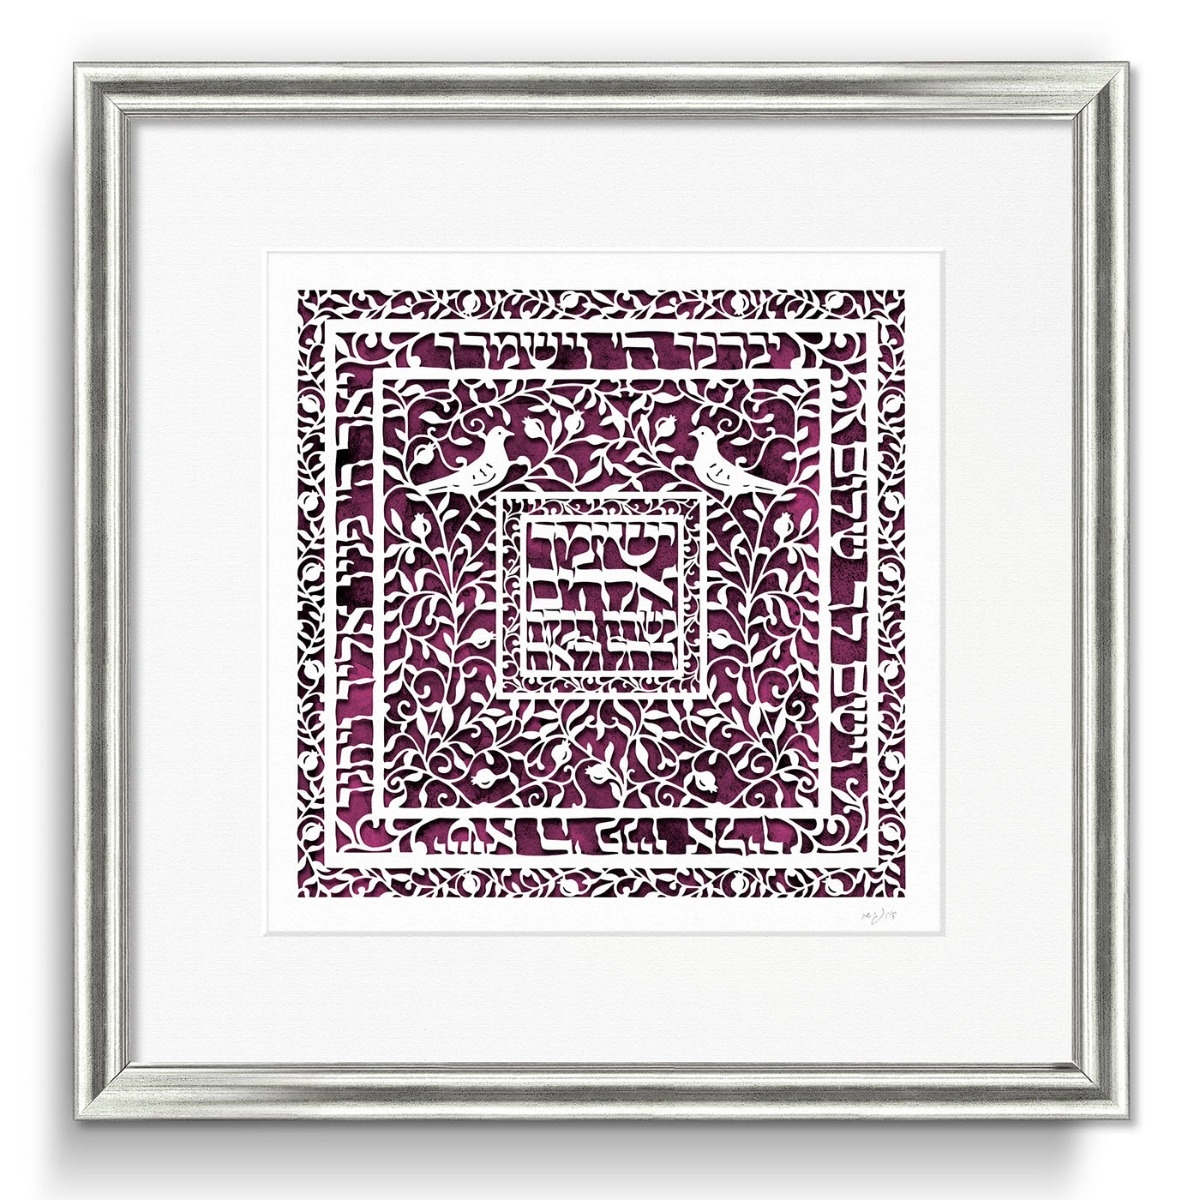 David Fisher Laser Cut Paper Daughter's Blessing Wall Hanging (Choice of Colors) - 1